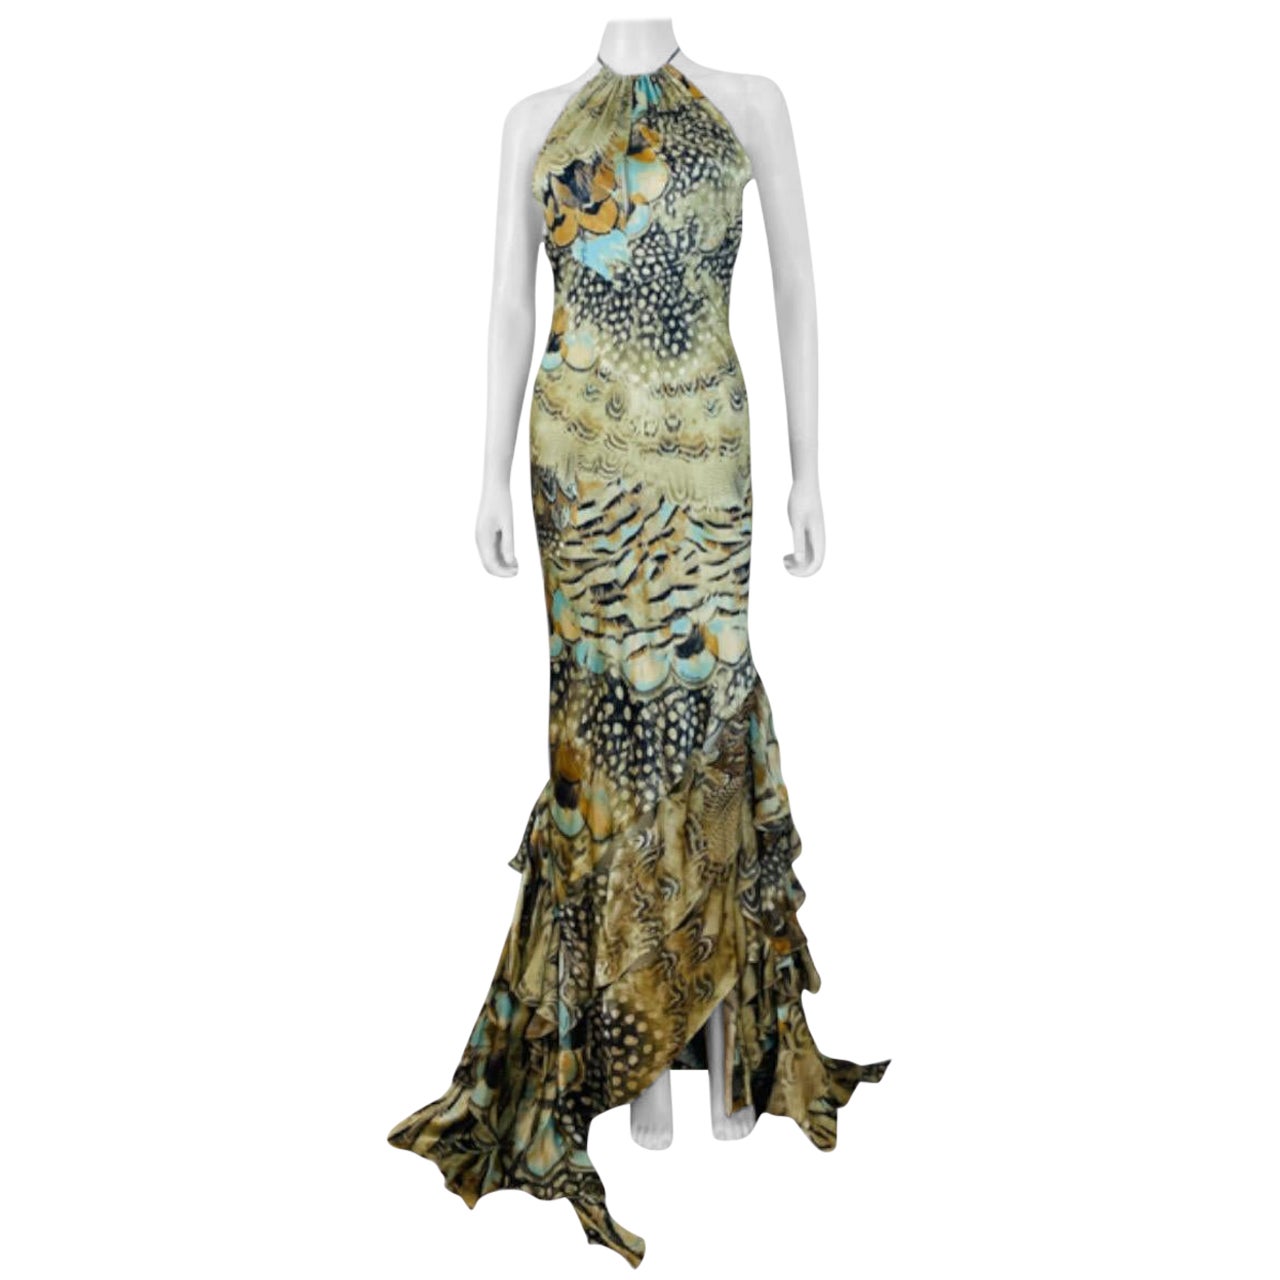 S/S 2004 Roberto Cavalli Silk Dress Gown
Incredible multi feather print silk fabric with gold glitter acents
Halter neckline with with long ties with an iridescent beads and feathers at each end
Keyhole cut at at the bodice
Form fitted style with